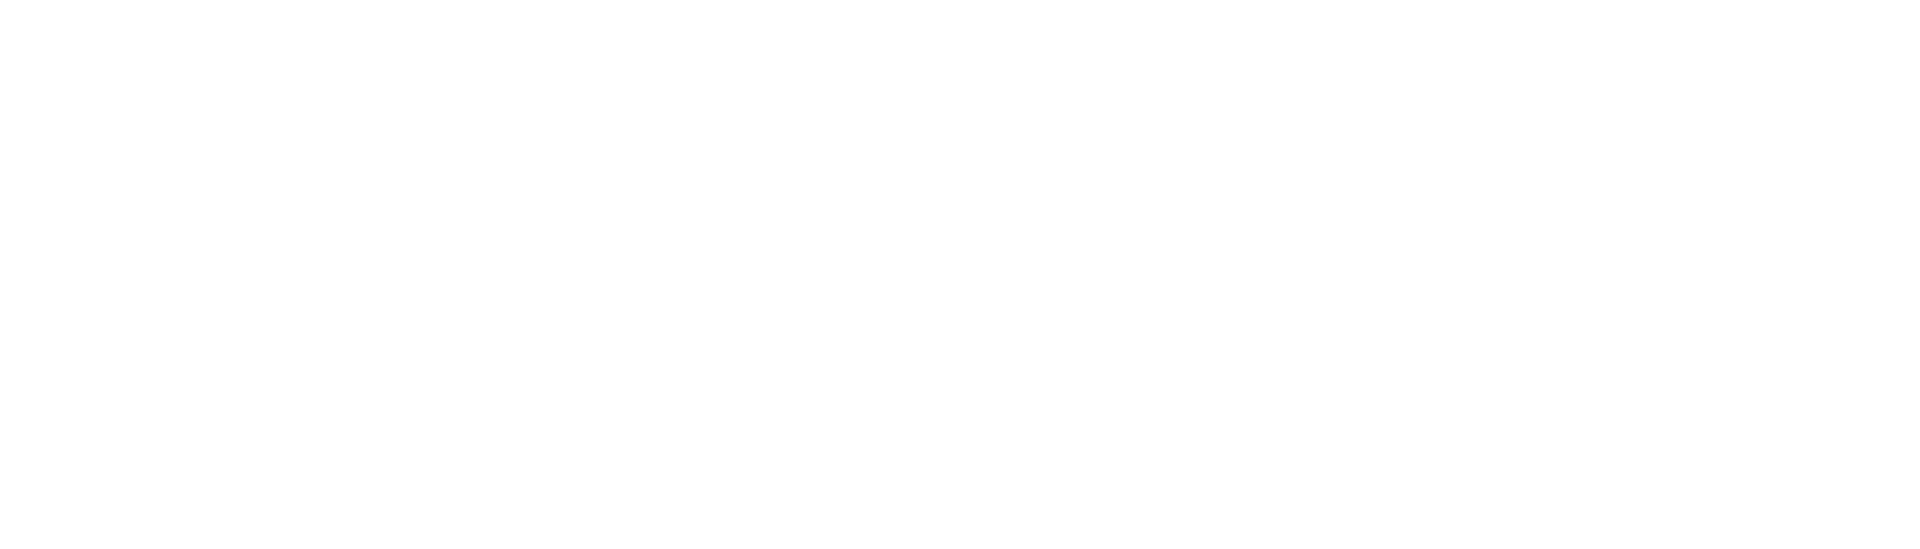 Bowser-Ondriezek Funeral Home and Cremation Services Logo